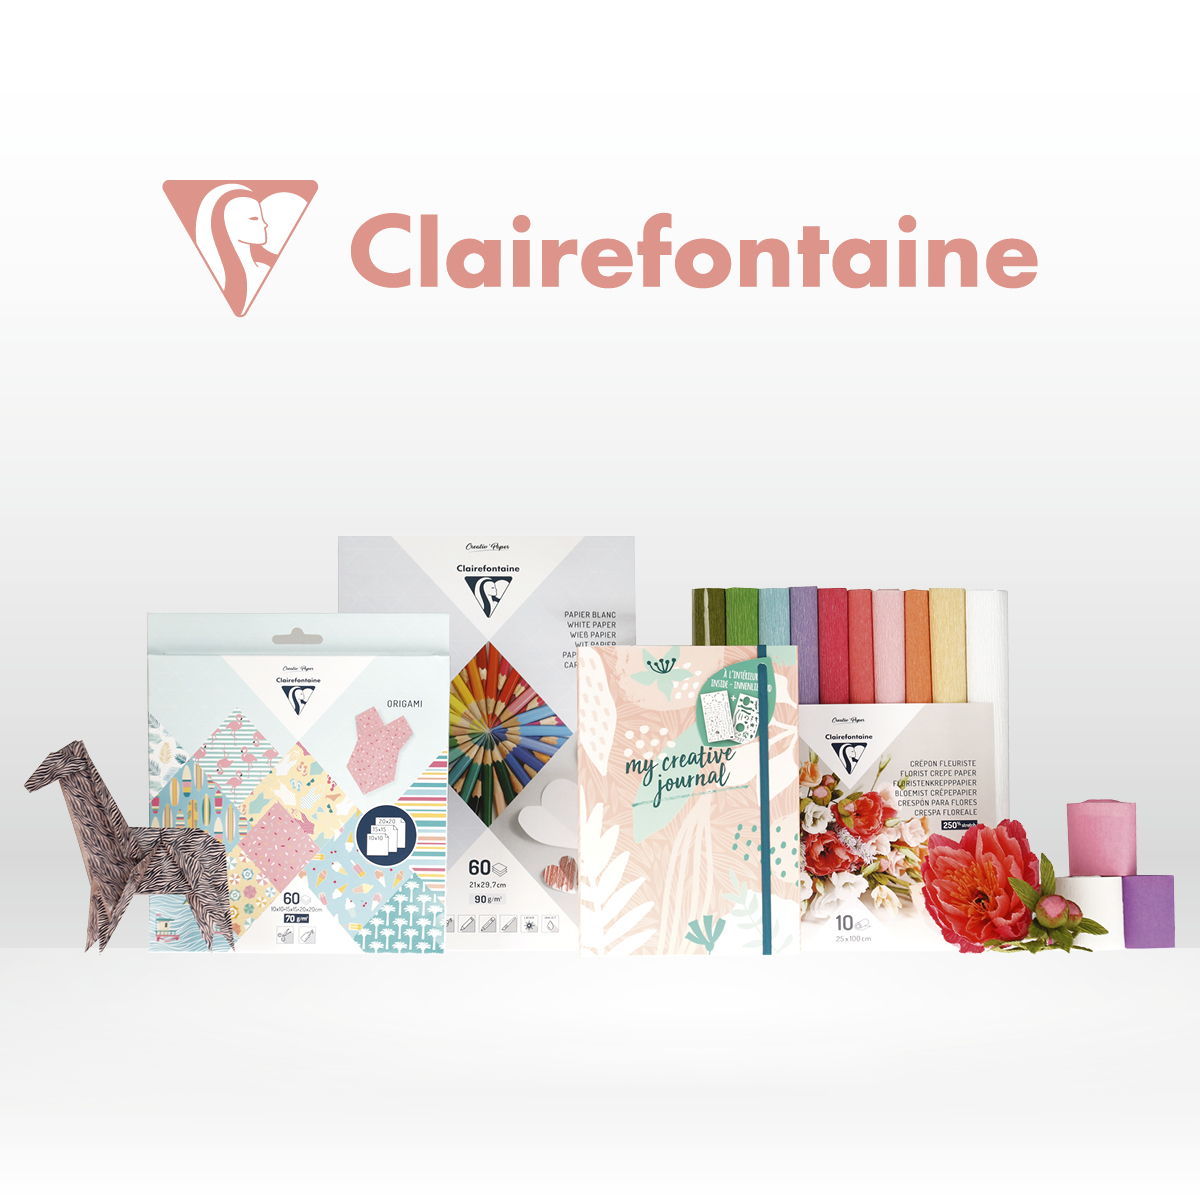 Clairefontaine - Stationery, art & crafts for school, office & home